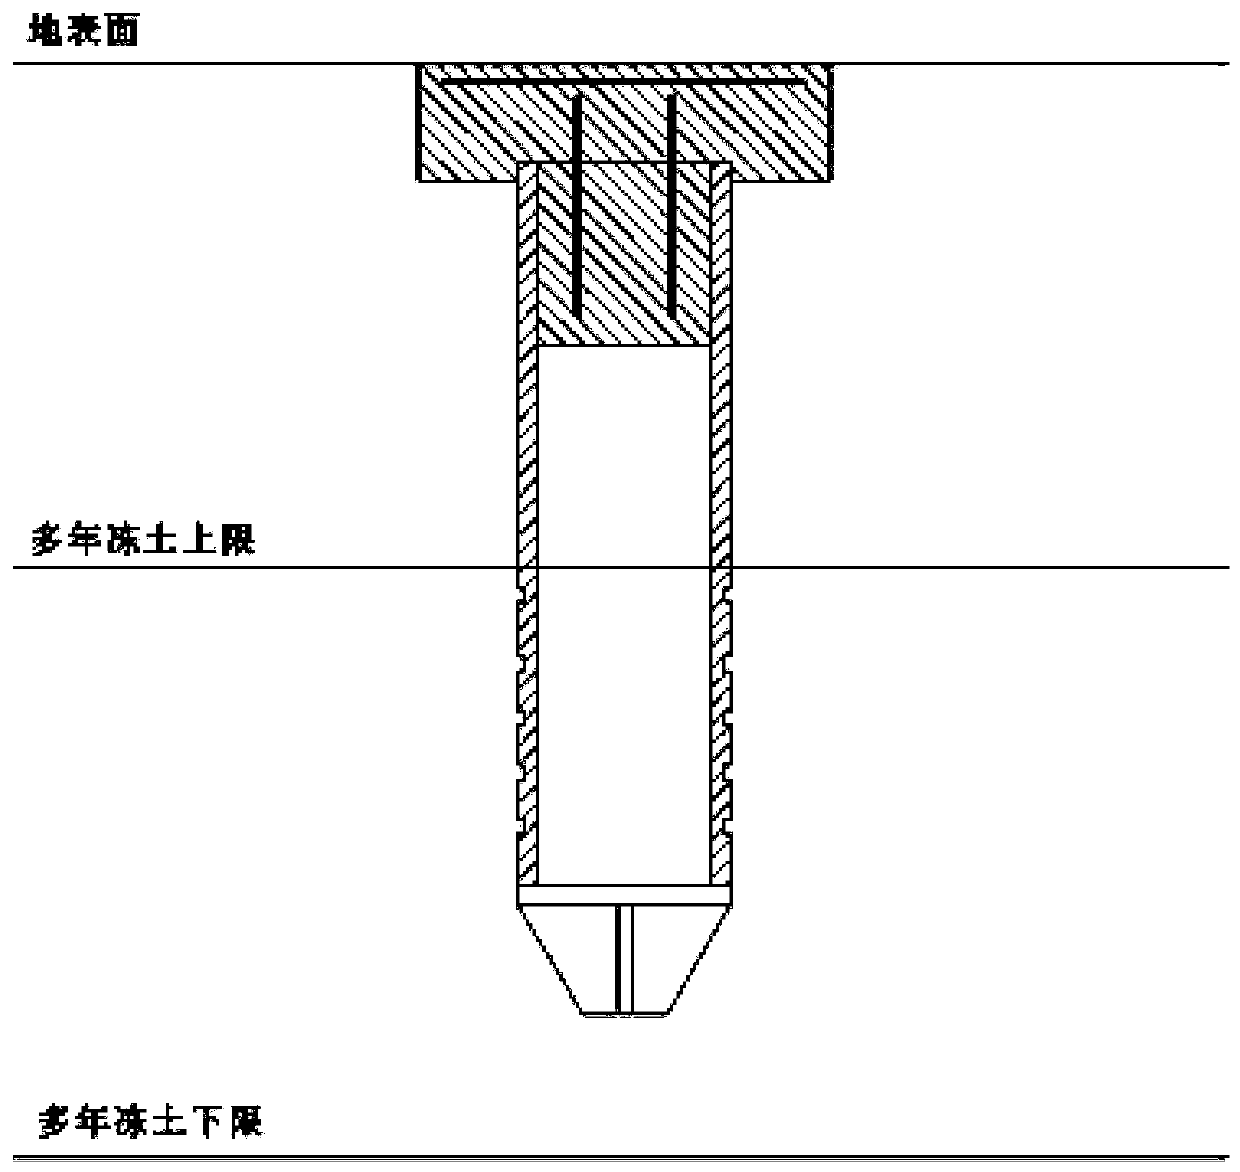 Concrete pipe pile for treating thaw collapse of island-shaped frozen soil foundation, and construction method of concrete pipe pile